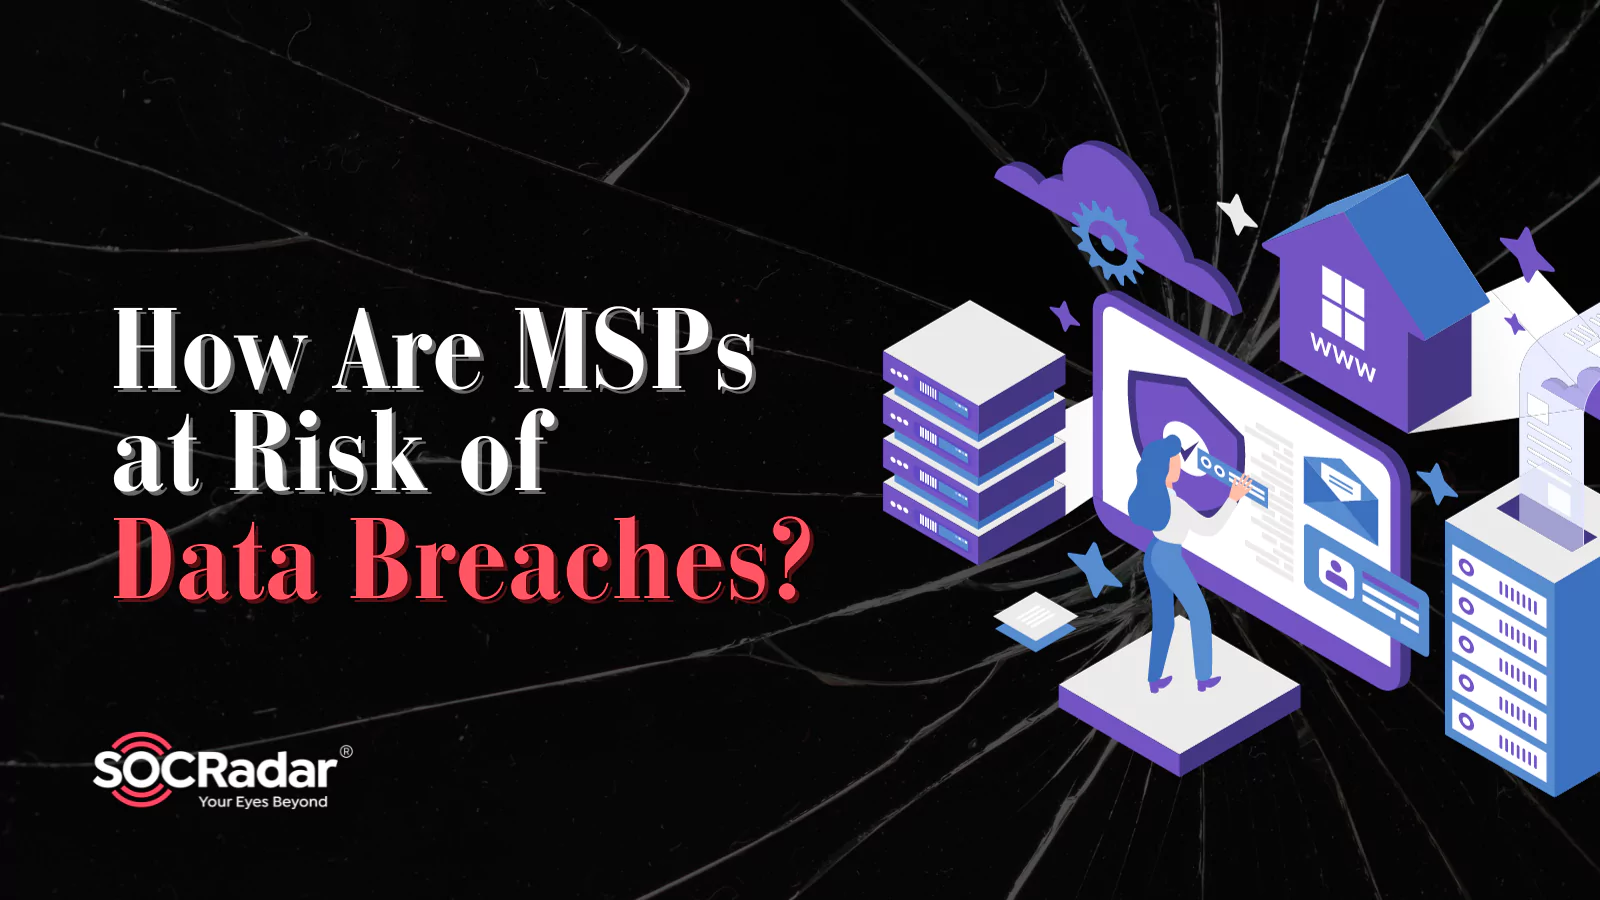 SOCRadar® Cyber Intelligence Inc. | How Are MSPs (Managed Service Providers) at Risk of Data Breaches?